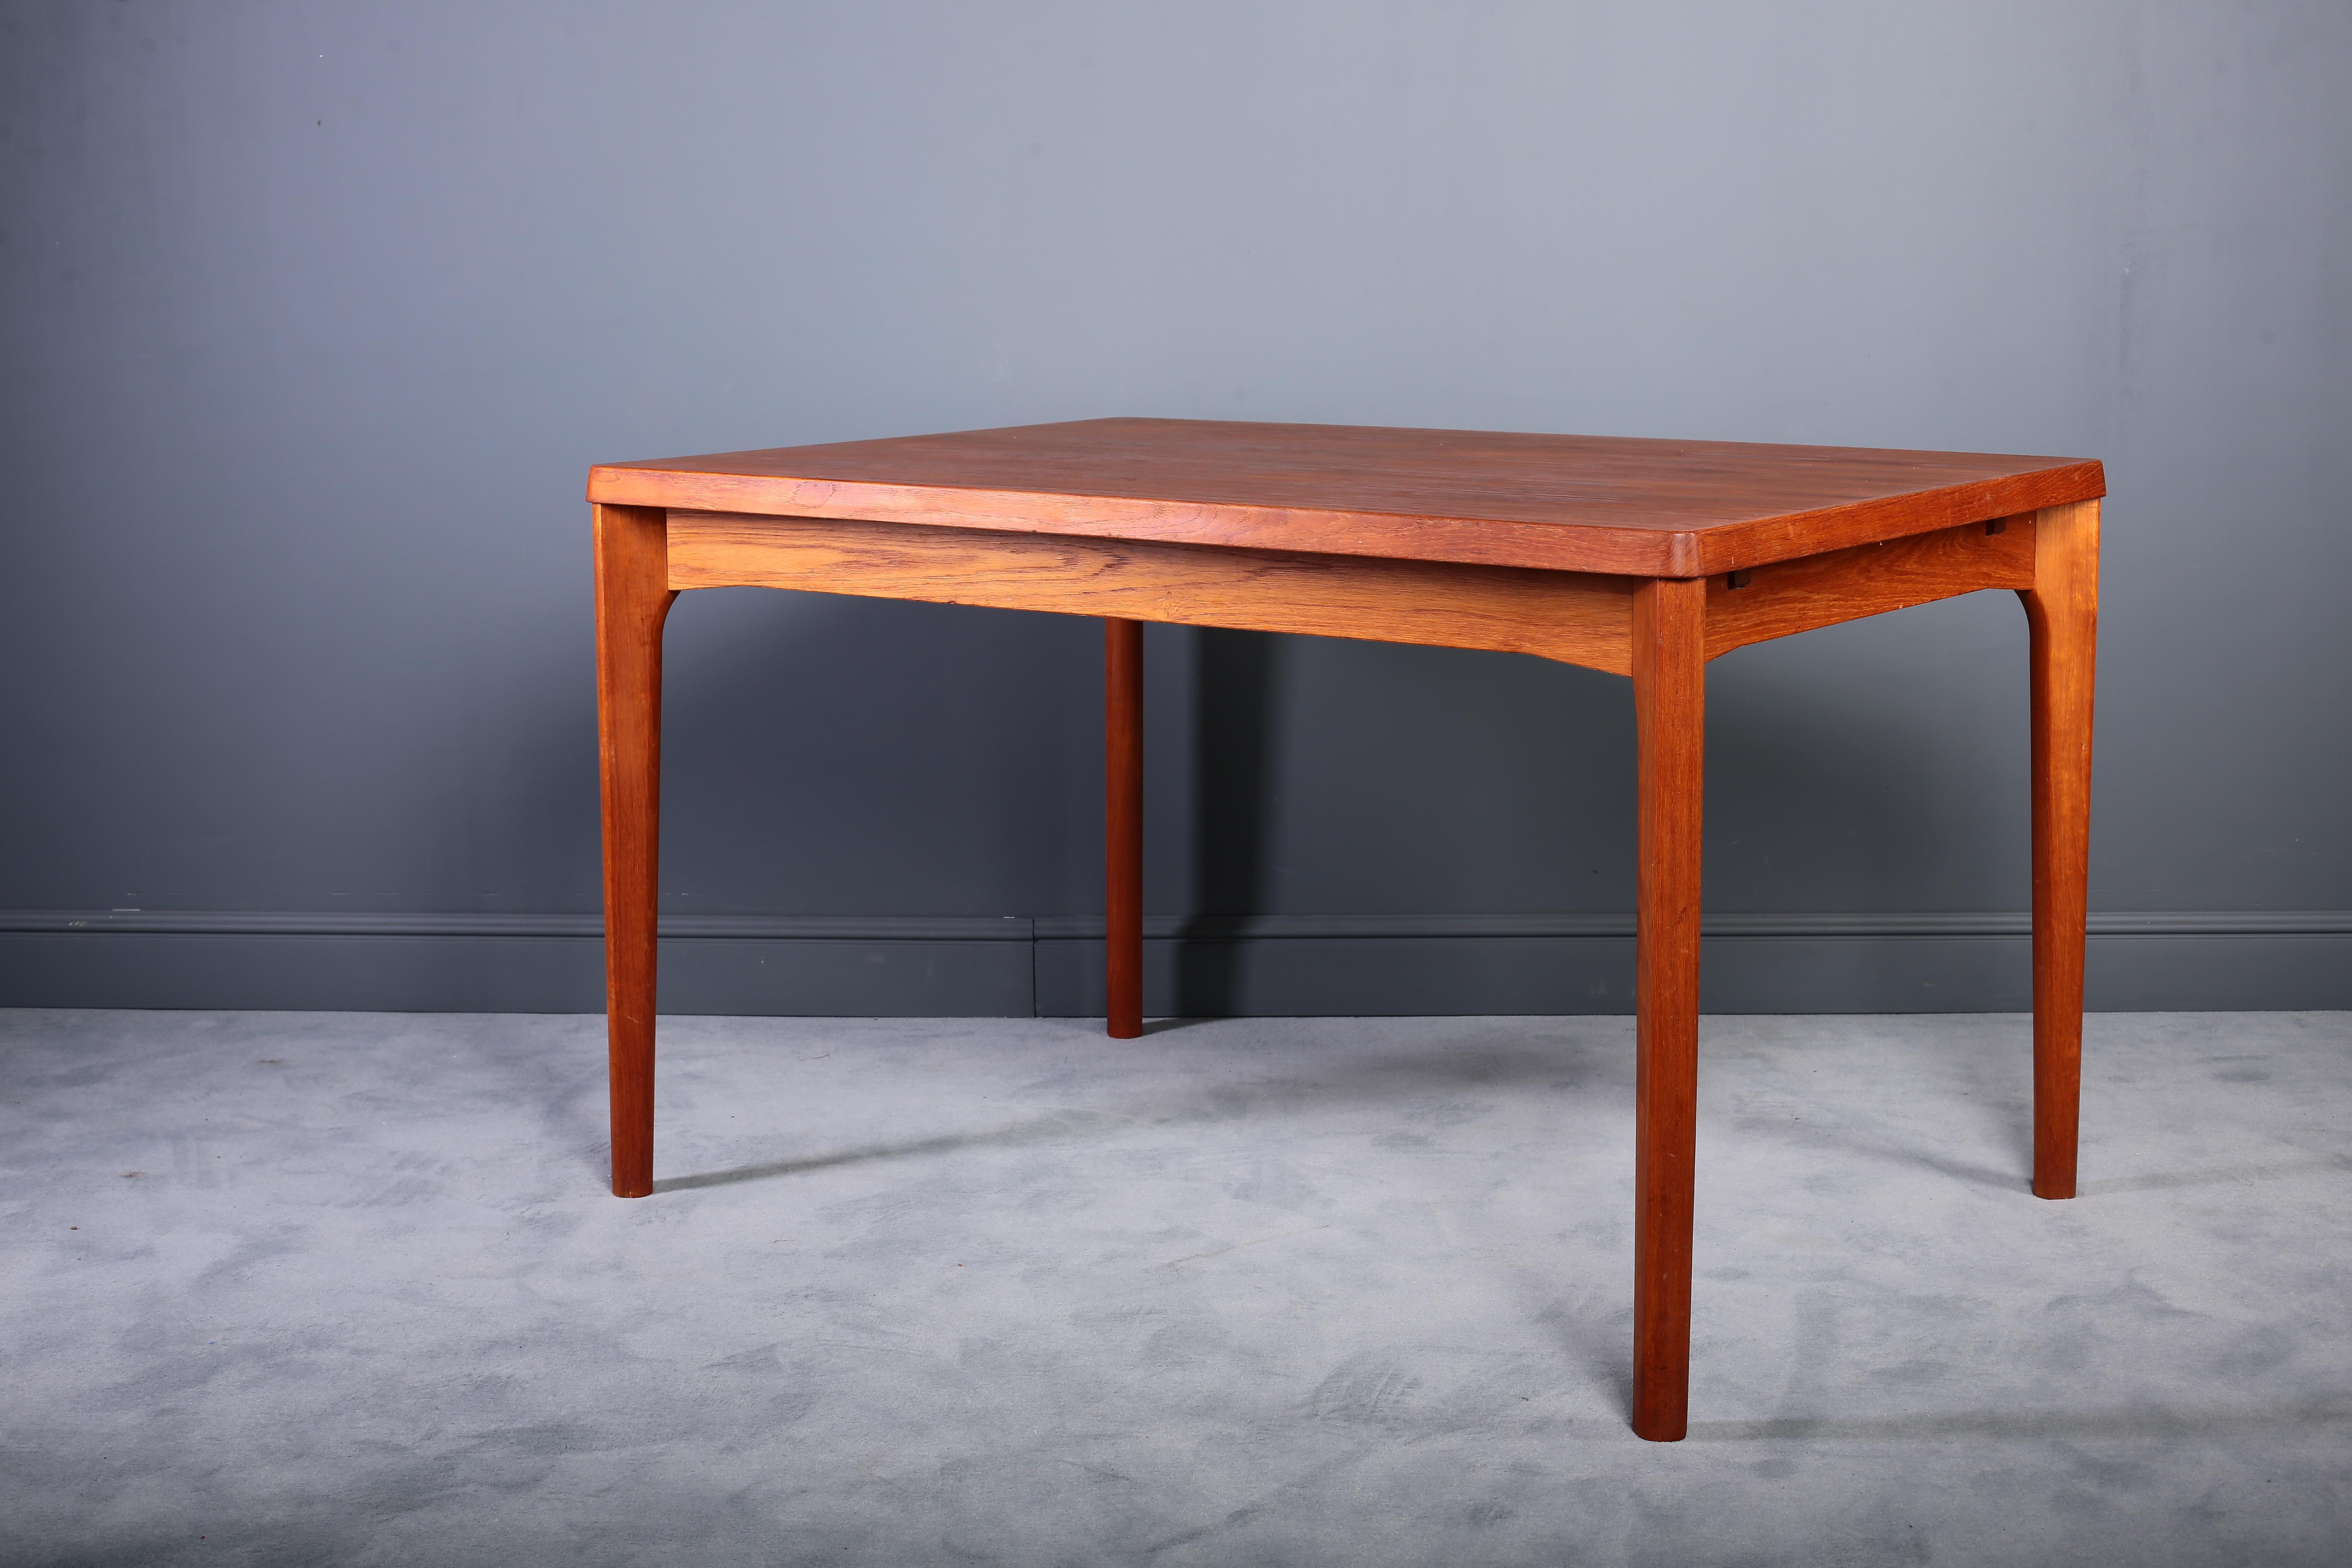 Beautiful extendable teak dining table, designed in the 1960s by Henning Kjaernulf, manufactured by Vejle Møbelfabrik, Denmark. Well thought out design, which hides the extension leaves under the tabletop.
Measures: W 120 / 219 / D 85 / H 73 cm.